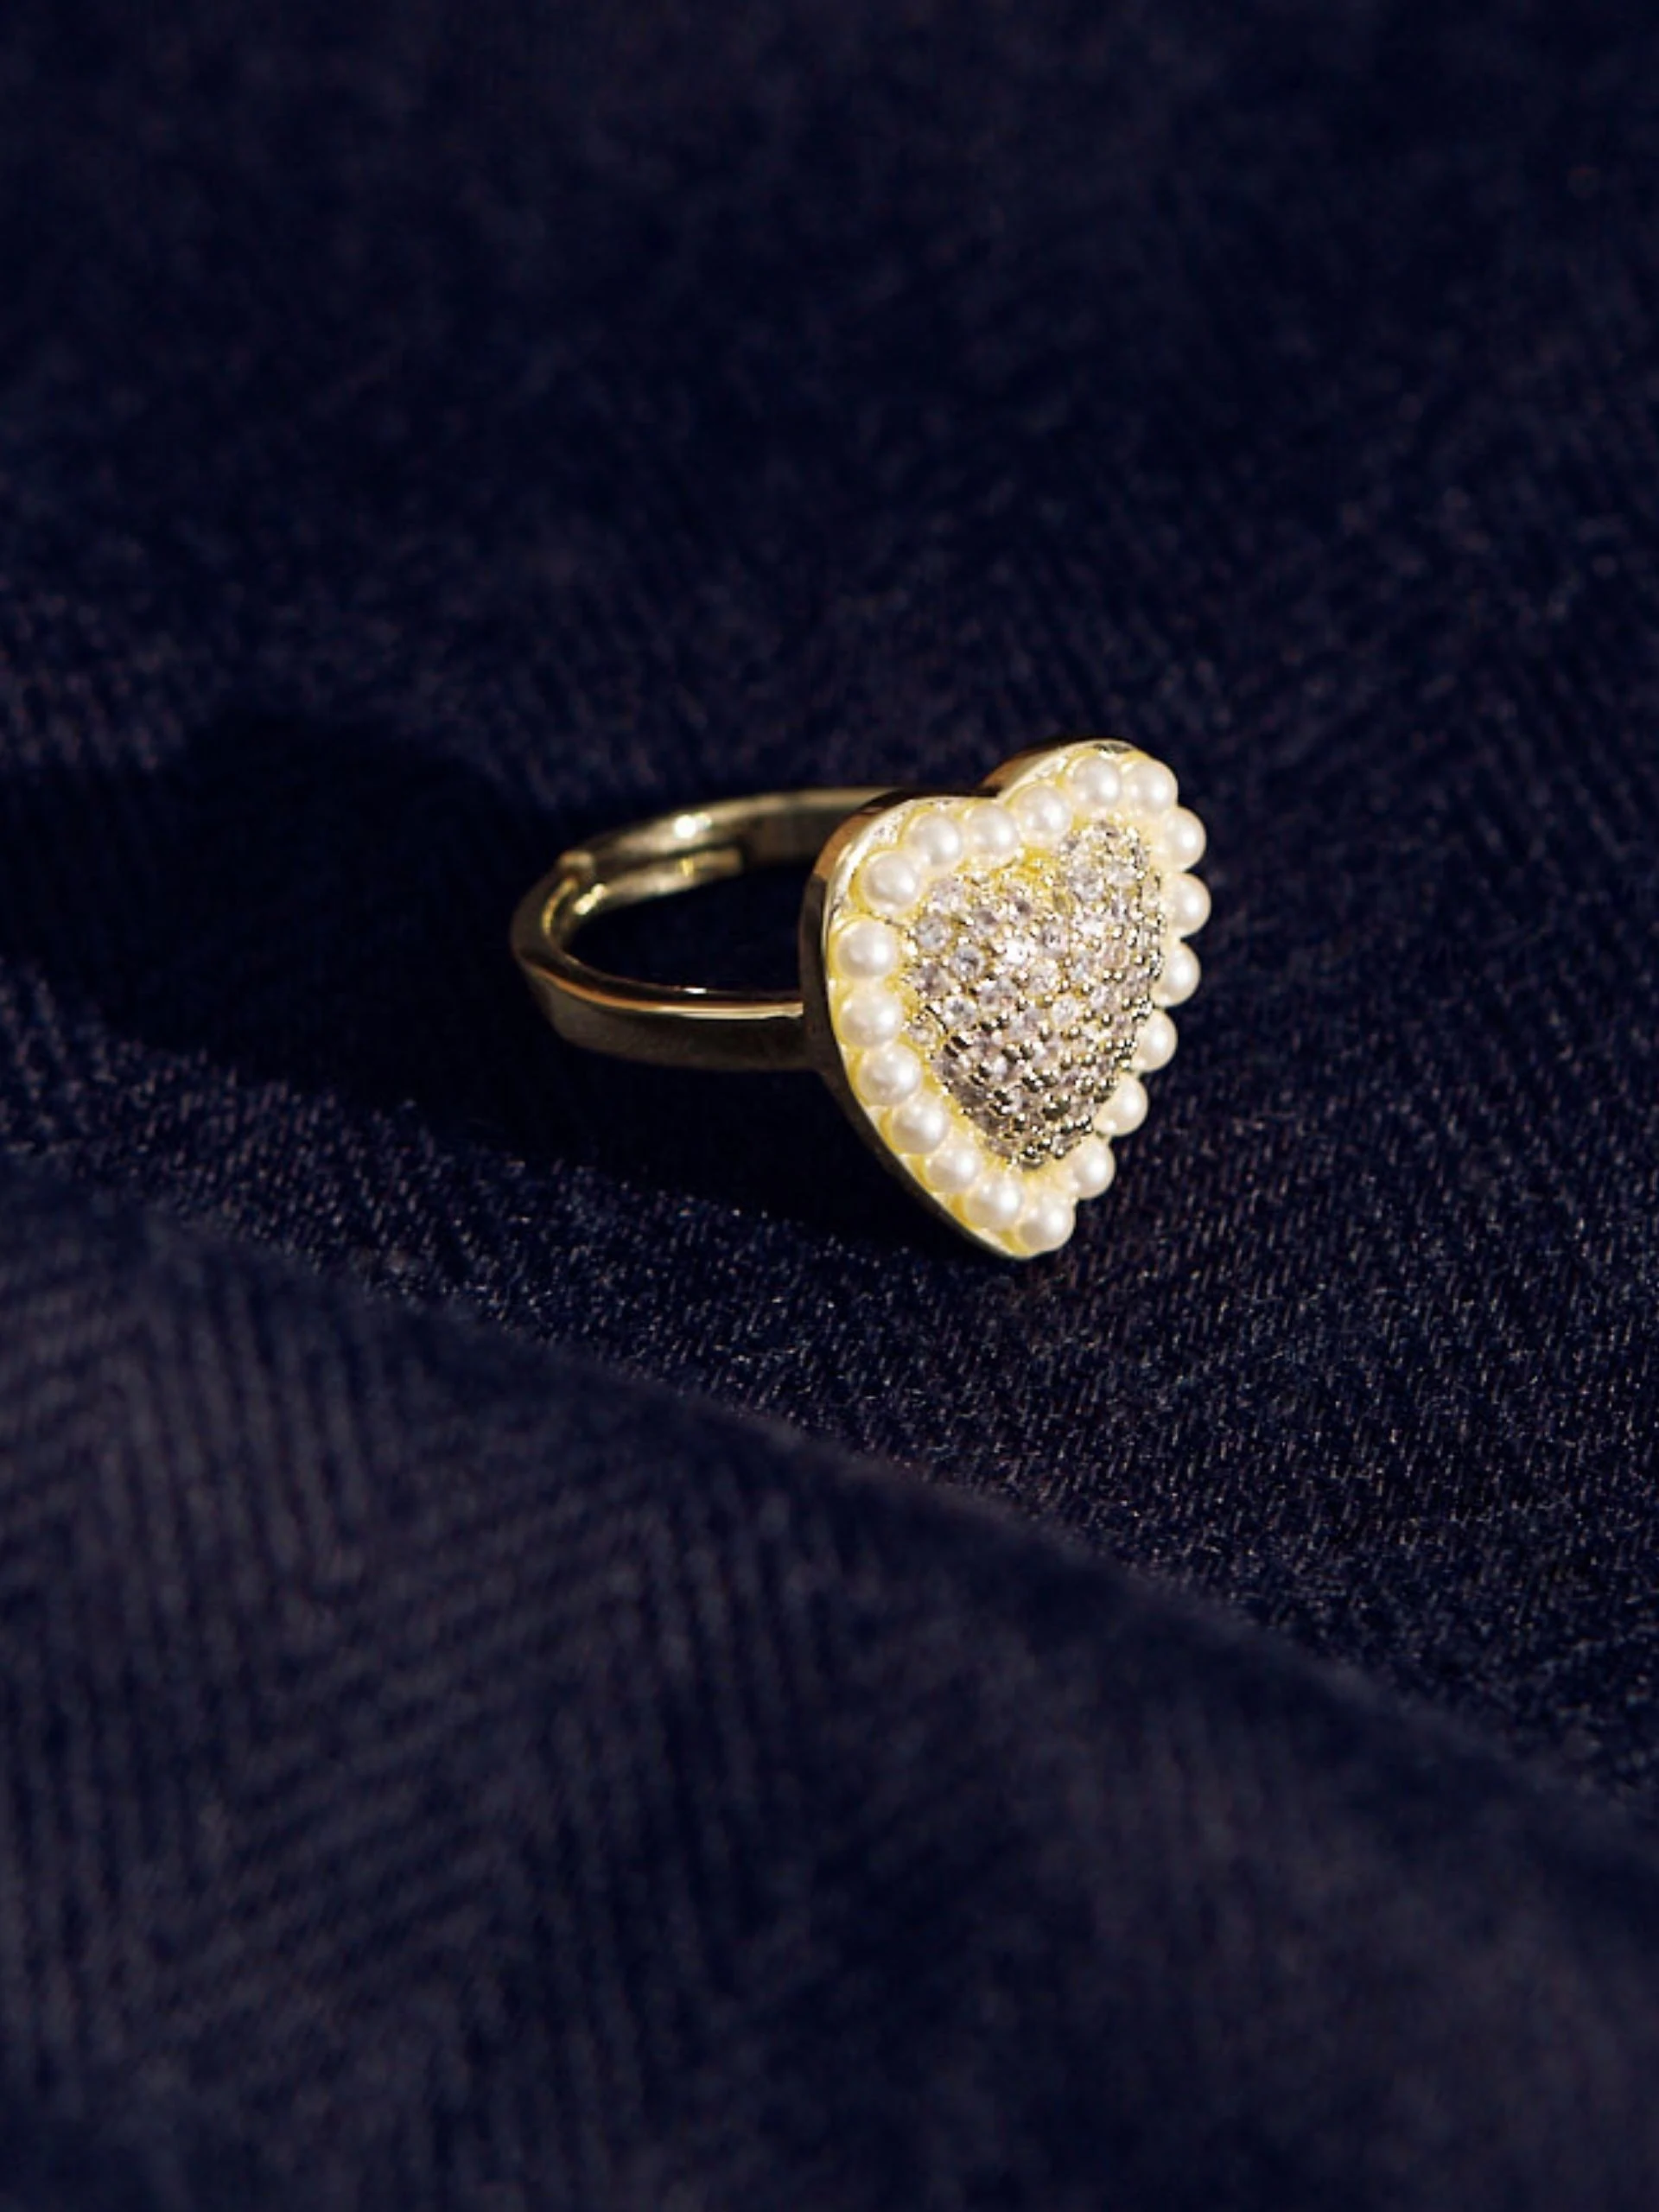 RING WITH A HEART